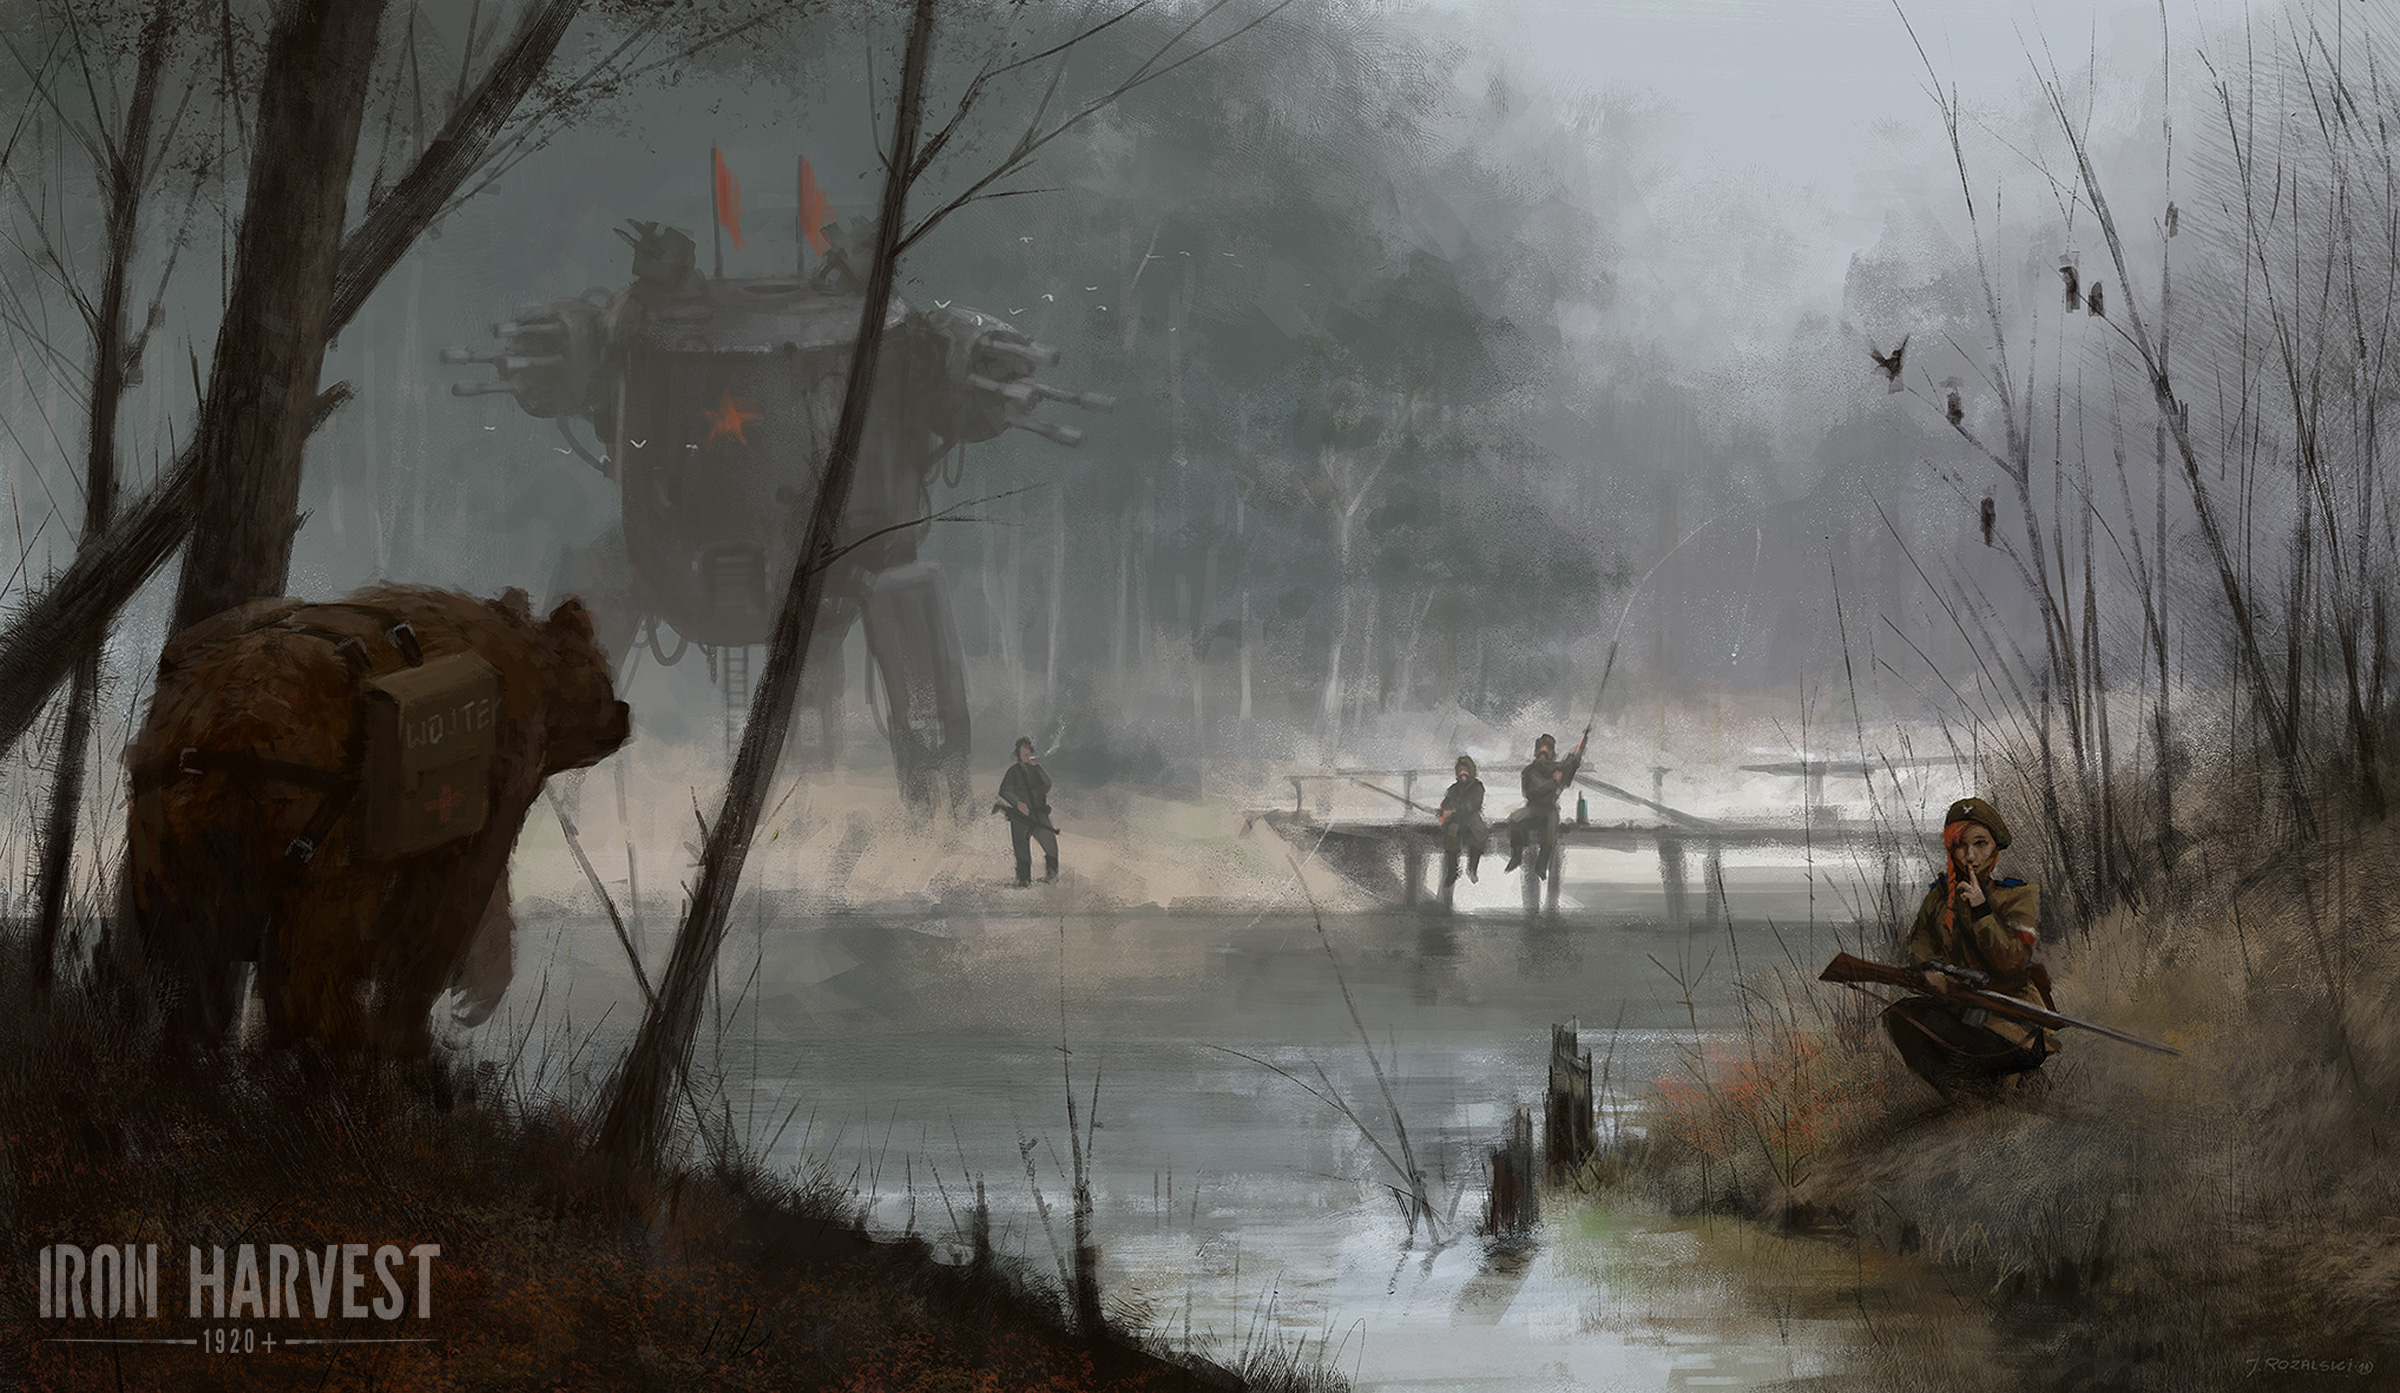 Iron Harvest 2020 Wallpapers